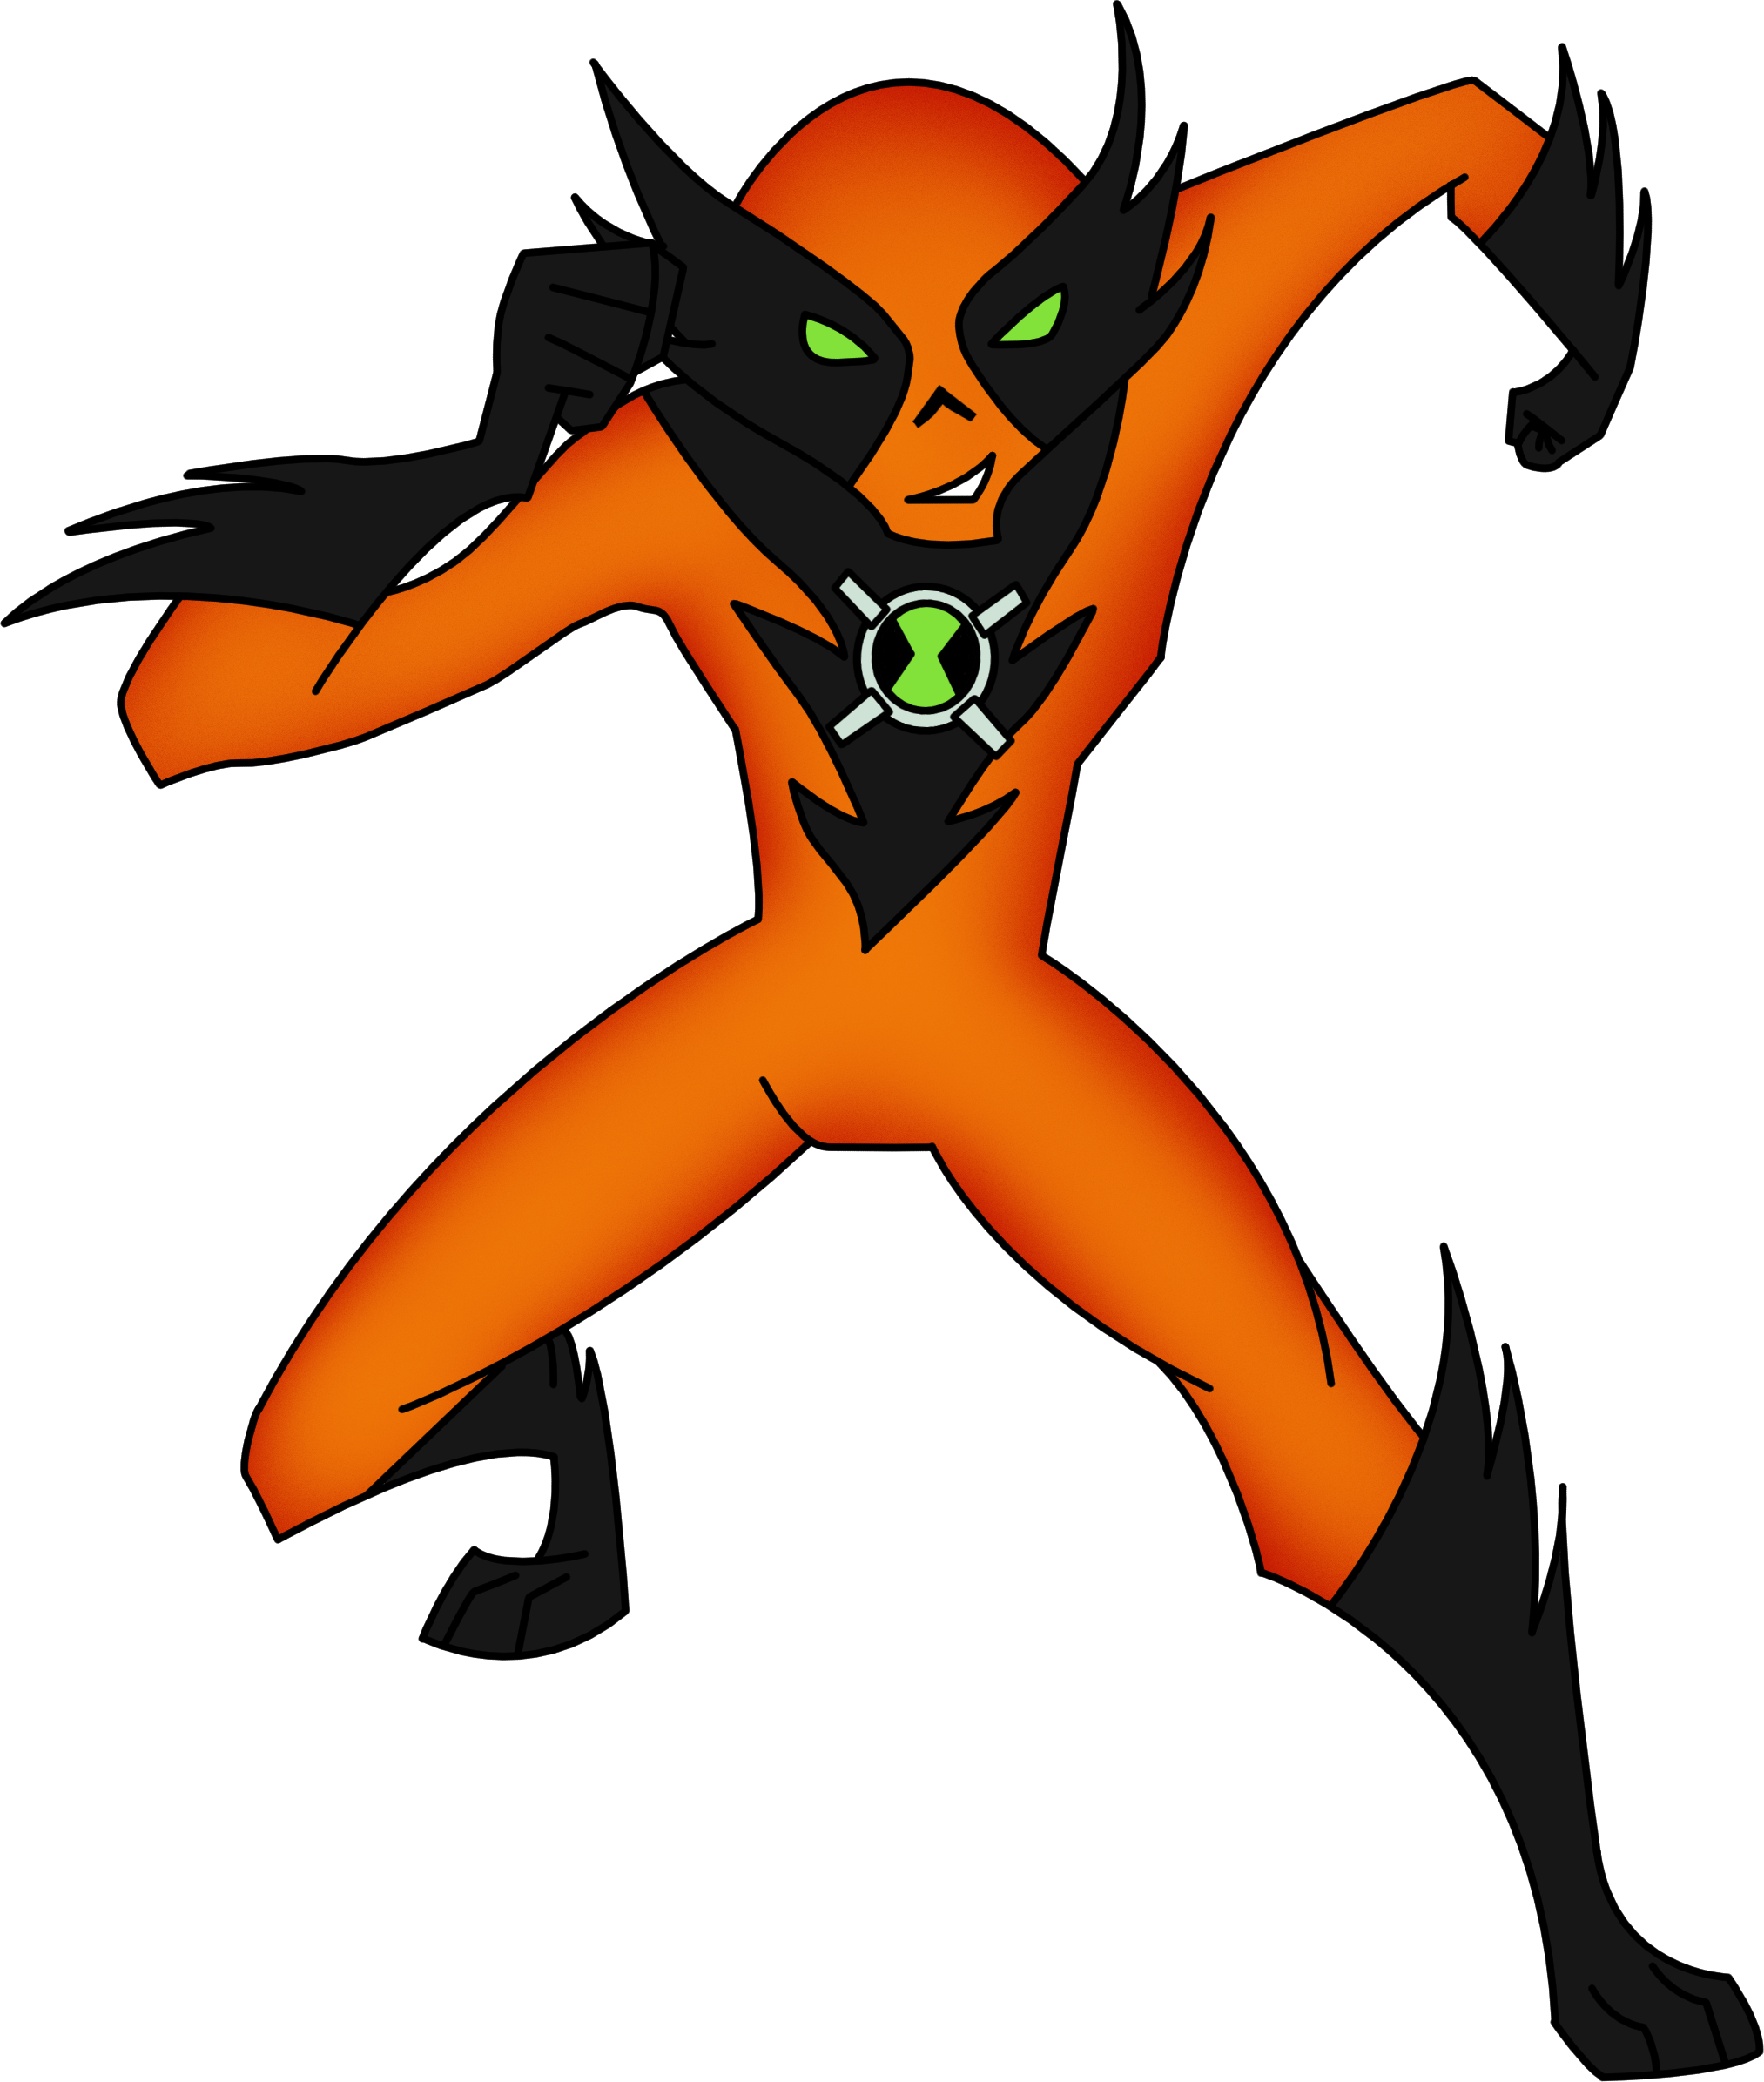 https://static.wikia.nocookie.net/ben10fanfiction/images/e/e3/Ultimate_Fasttrack.png/revision/latest?cb=20170822152904